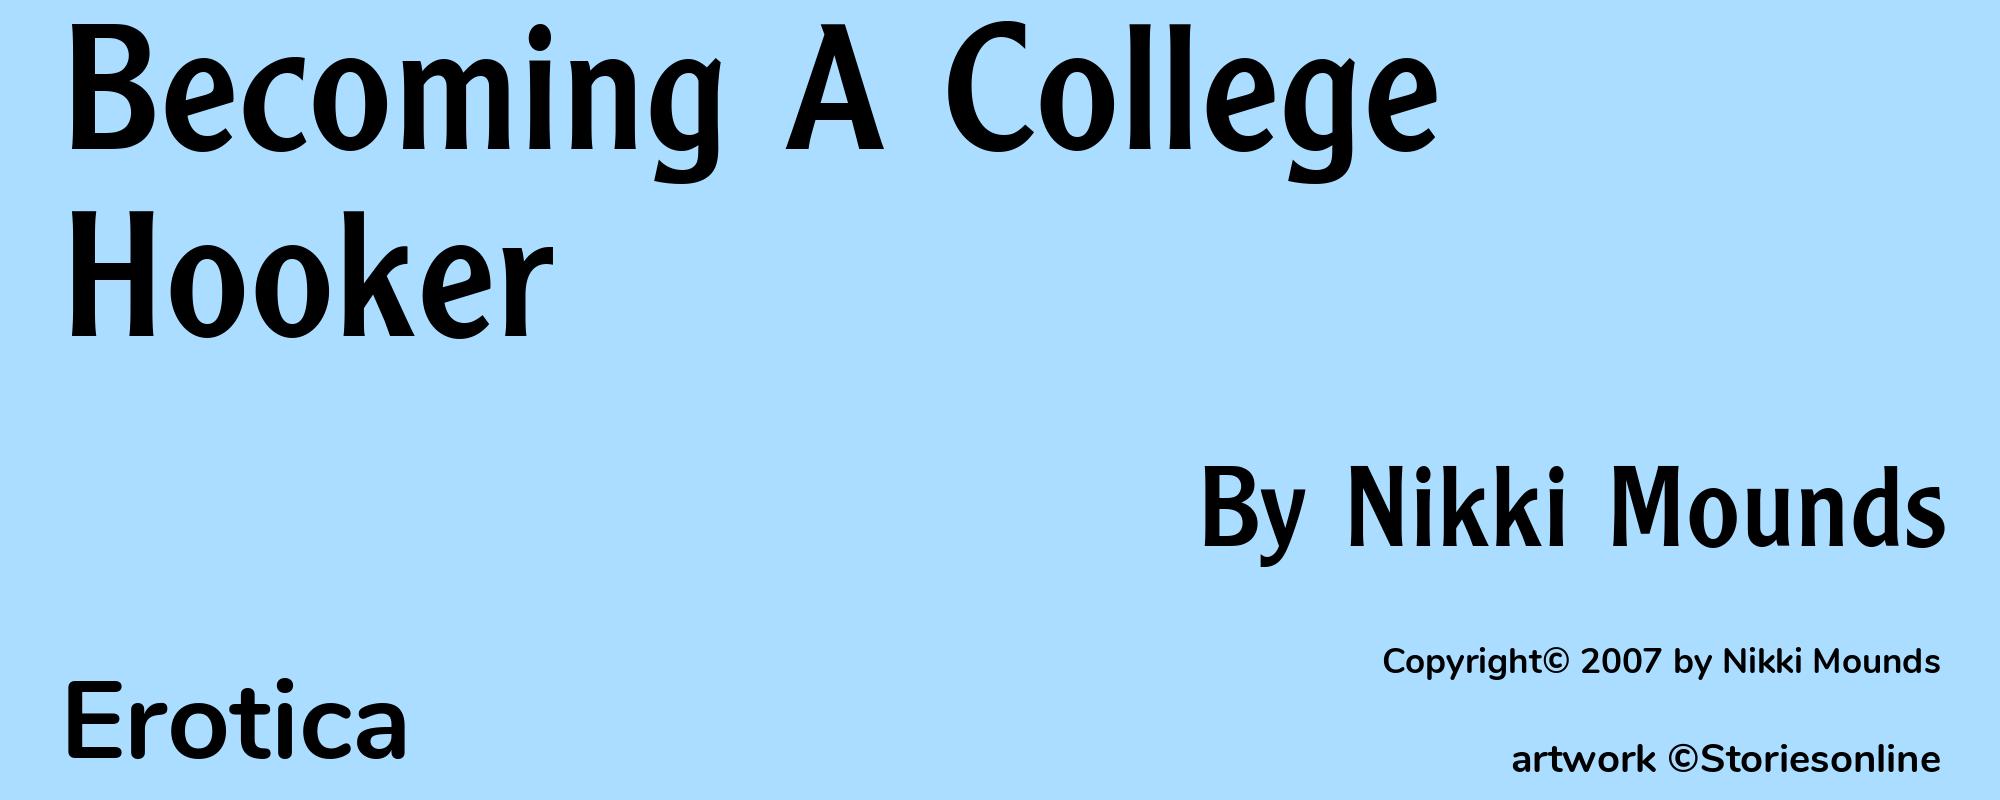 Becoming A College Hooker - Cover